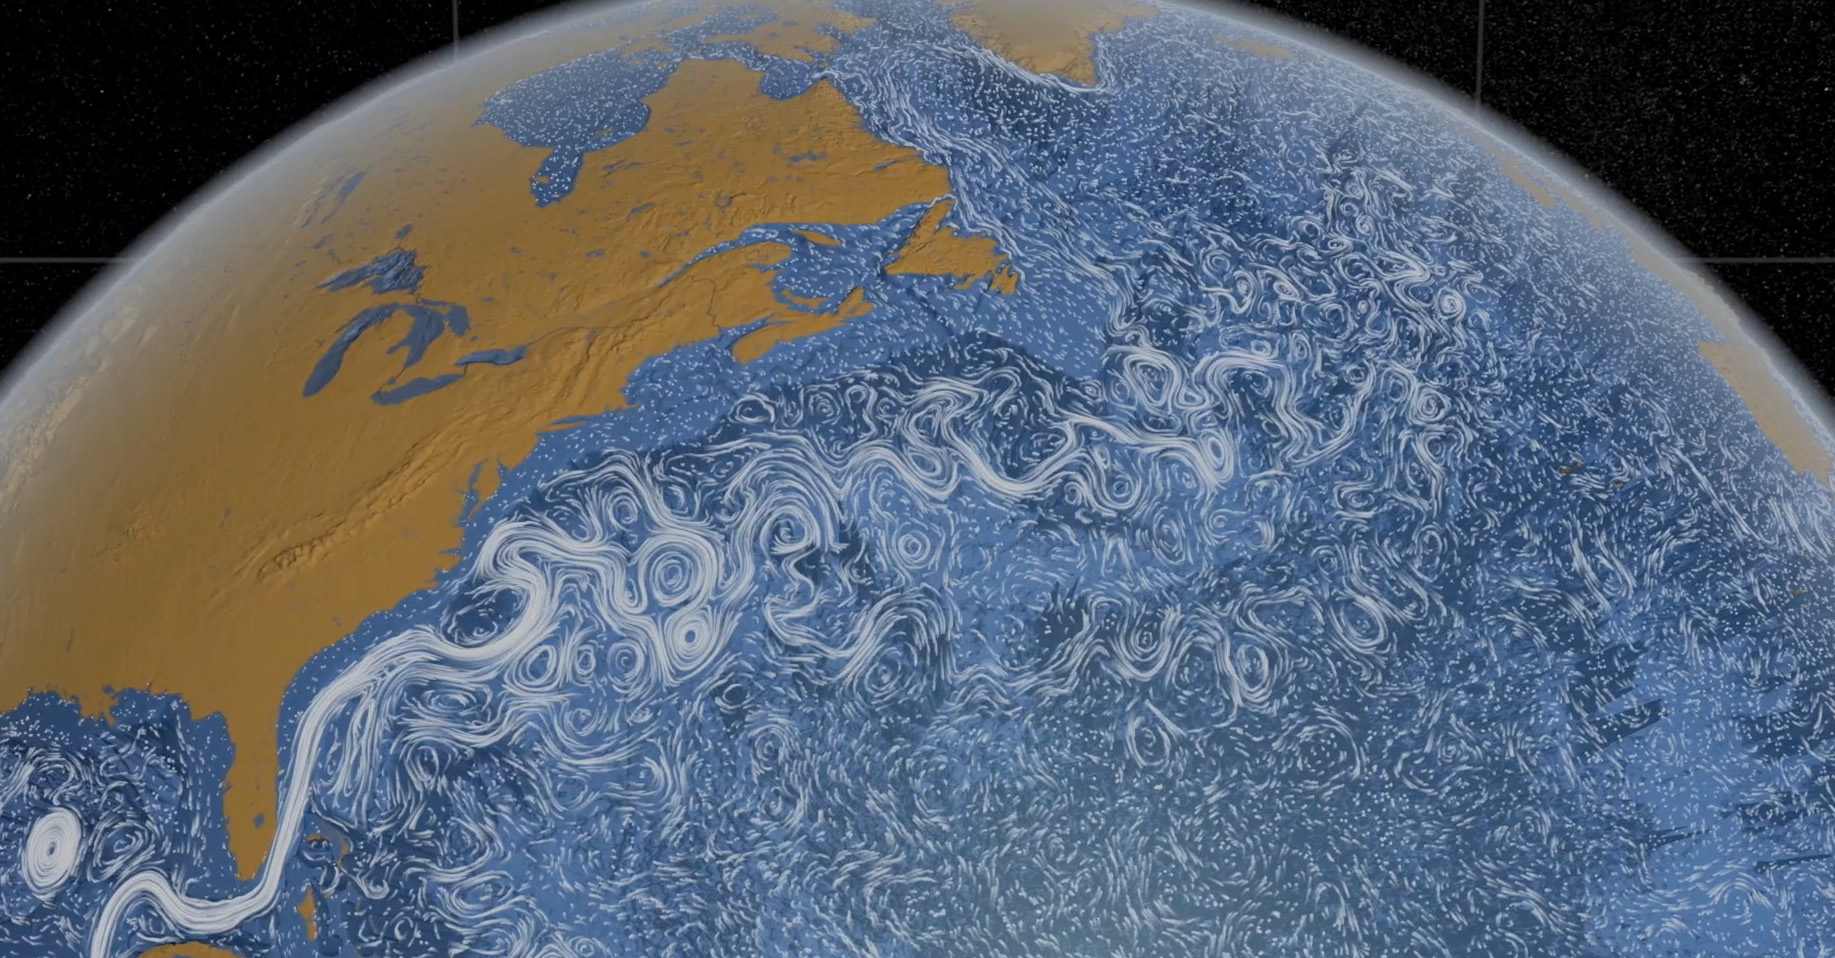 The image depicts a visualization of ocean currents on Earth, particularly focusing on the Atlantic Ocean. The intricate, swirling patterns represent the movement of water, showcasing the dynamic flow of currents. The landmasses, including parts of North America, Greenland, and Europe, are shown in a brownish hue, contrasting with the blue of the ocean. The currents are illustrated with white, wavy lines, emphasizing their direction and motion, creating a mesmerizing, almost artistic depiction of the perpetual movement of the ocean.